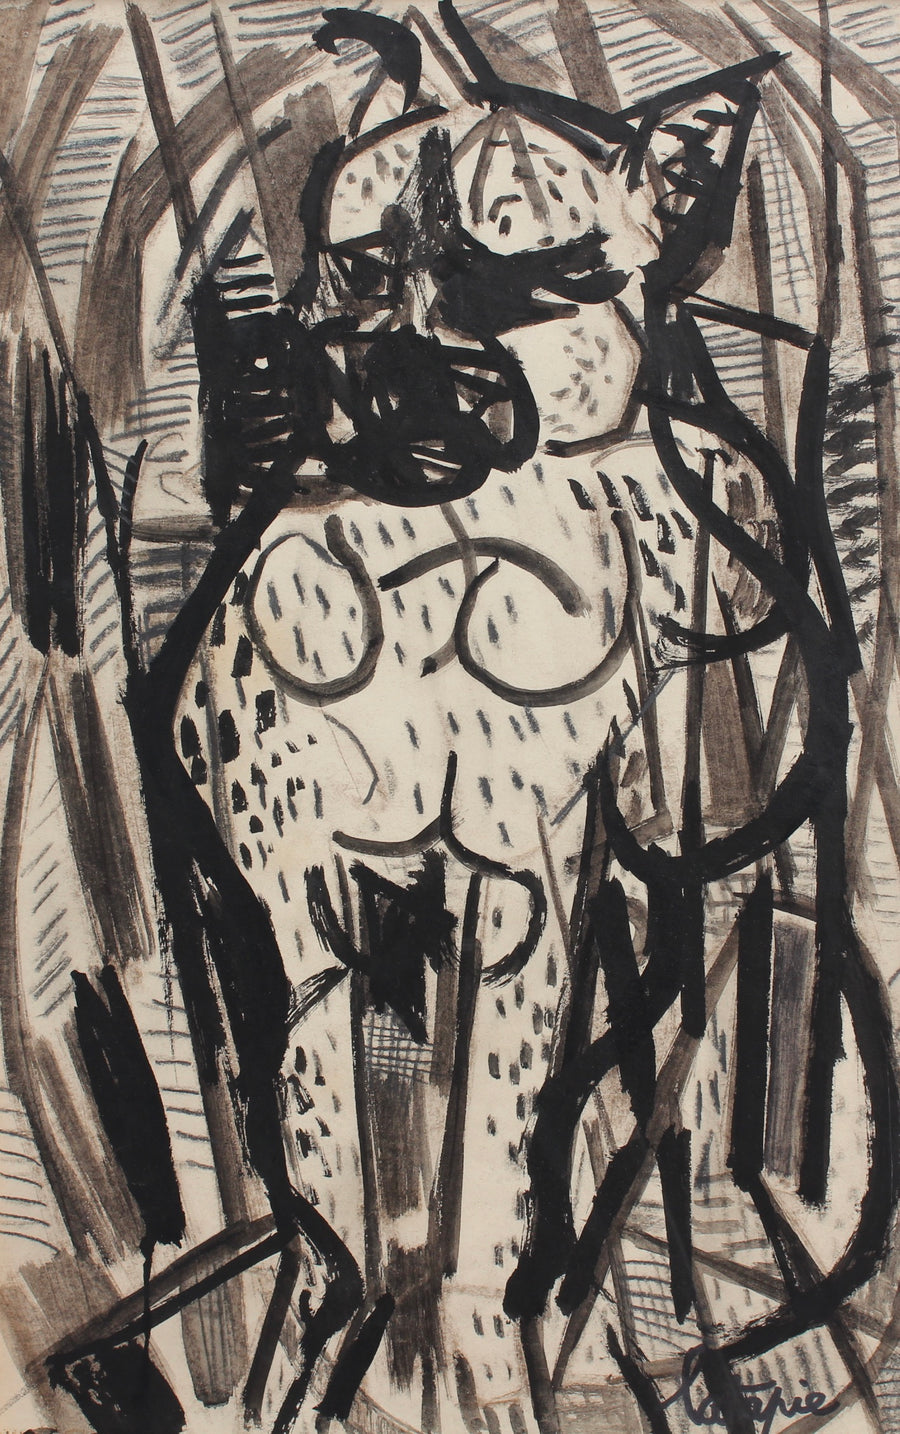 'A Dog Named Victor' by Louis Latapie (circa 1940s)